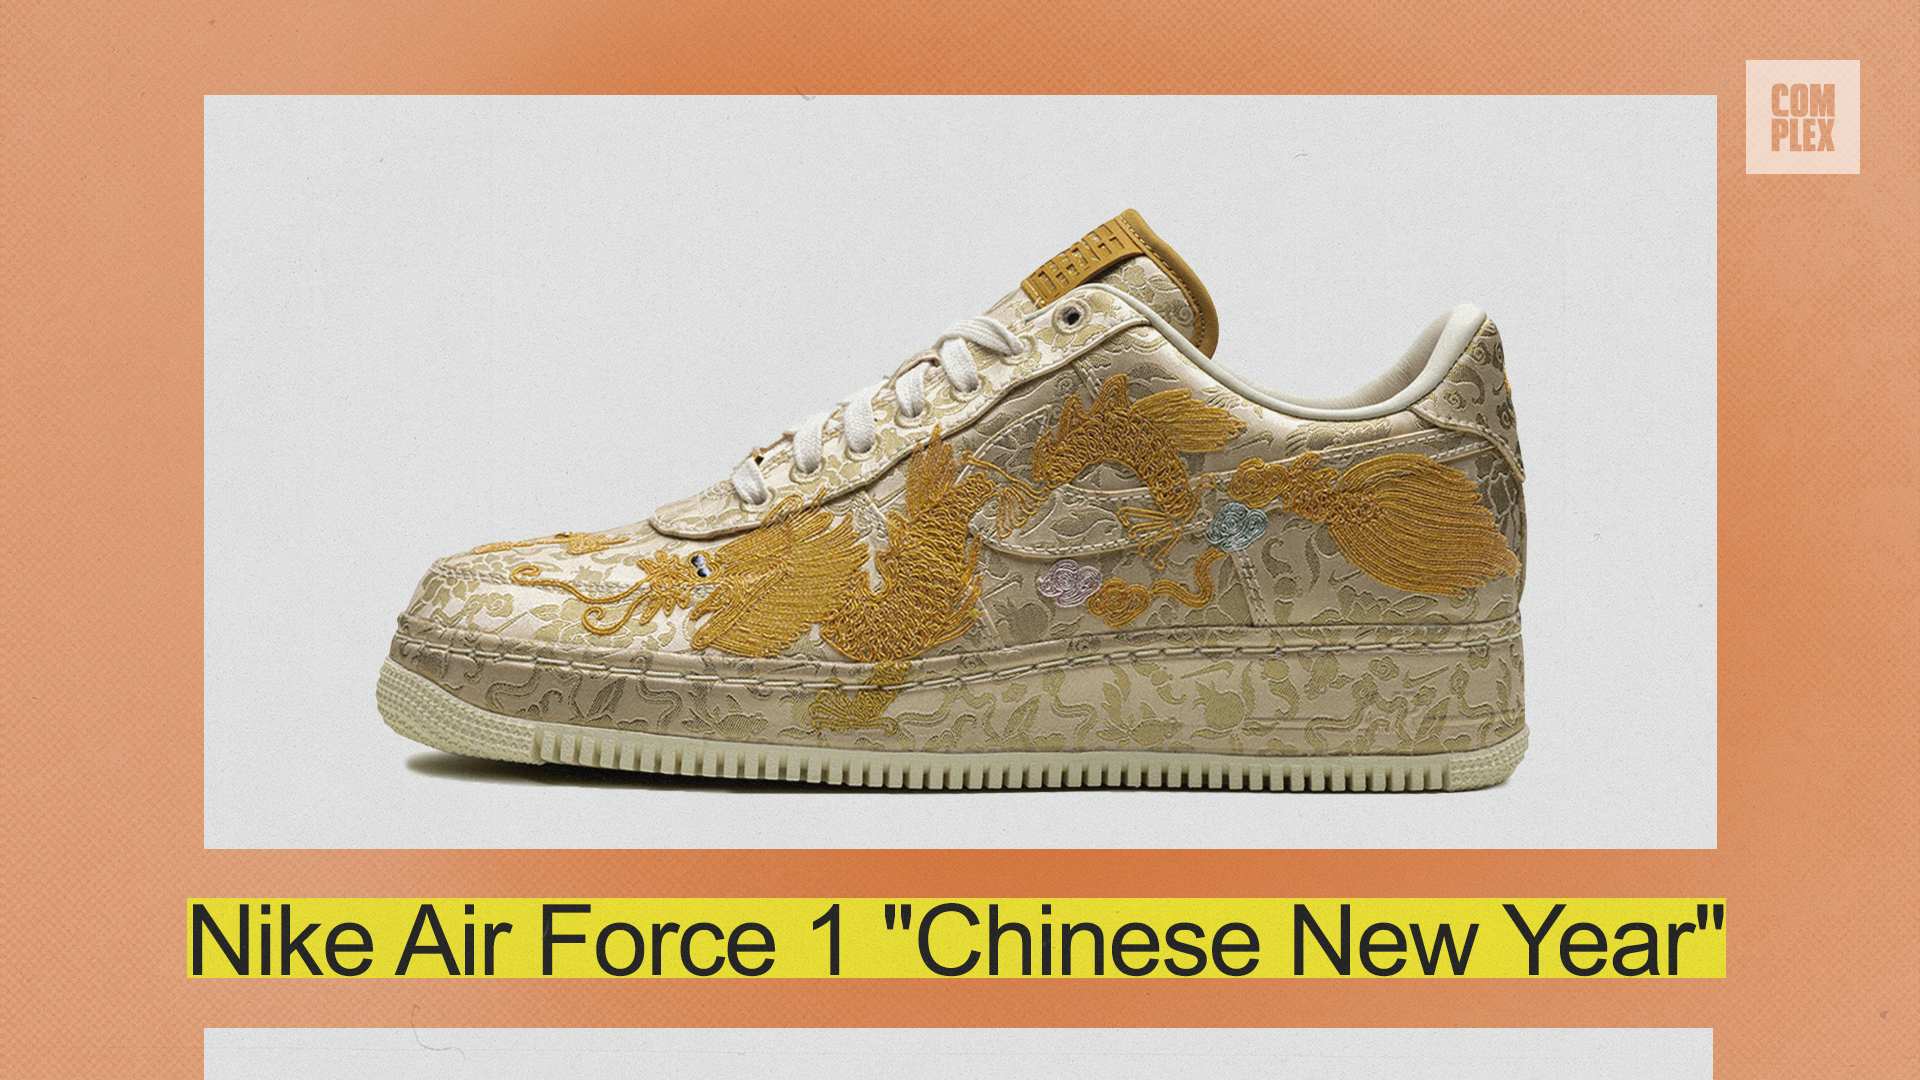 Nike Air Force 1 &quot;Chinese New Year&quot; sneaker featuring intricate patterns on the upper and a yellow Complex logo in the top right corner